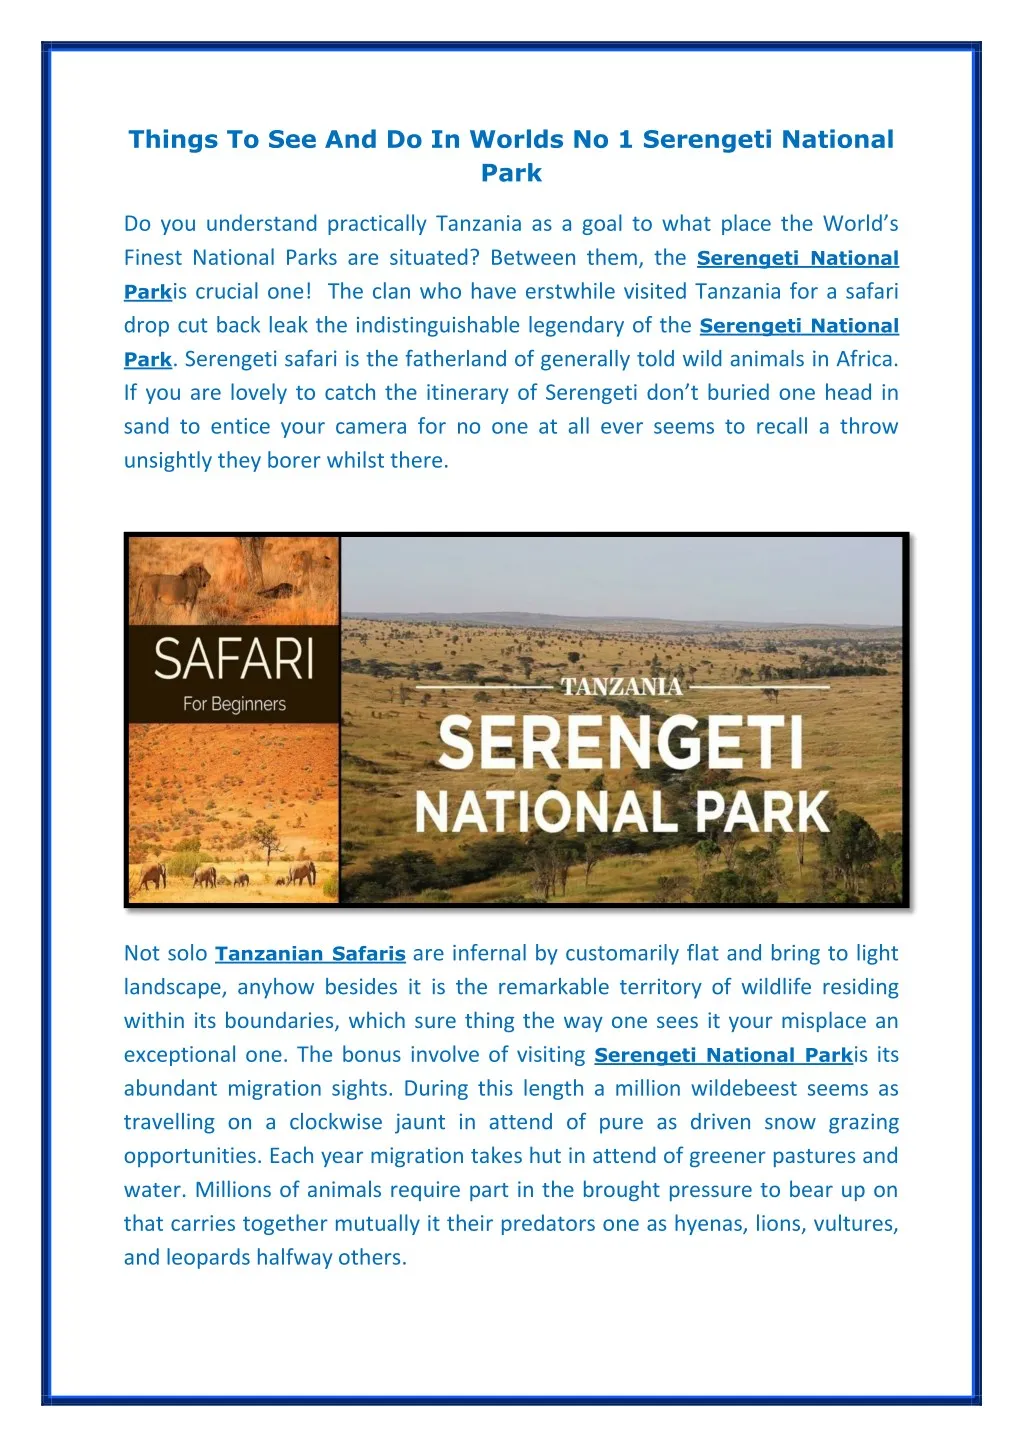 things to see and do in worlds no 1 serengeti